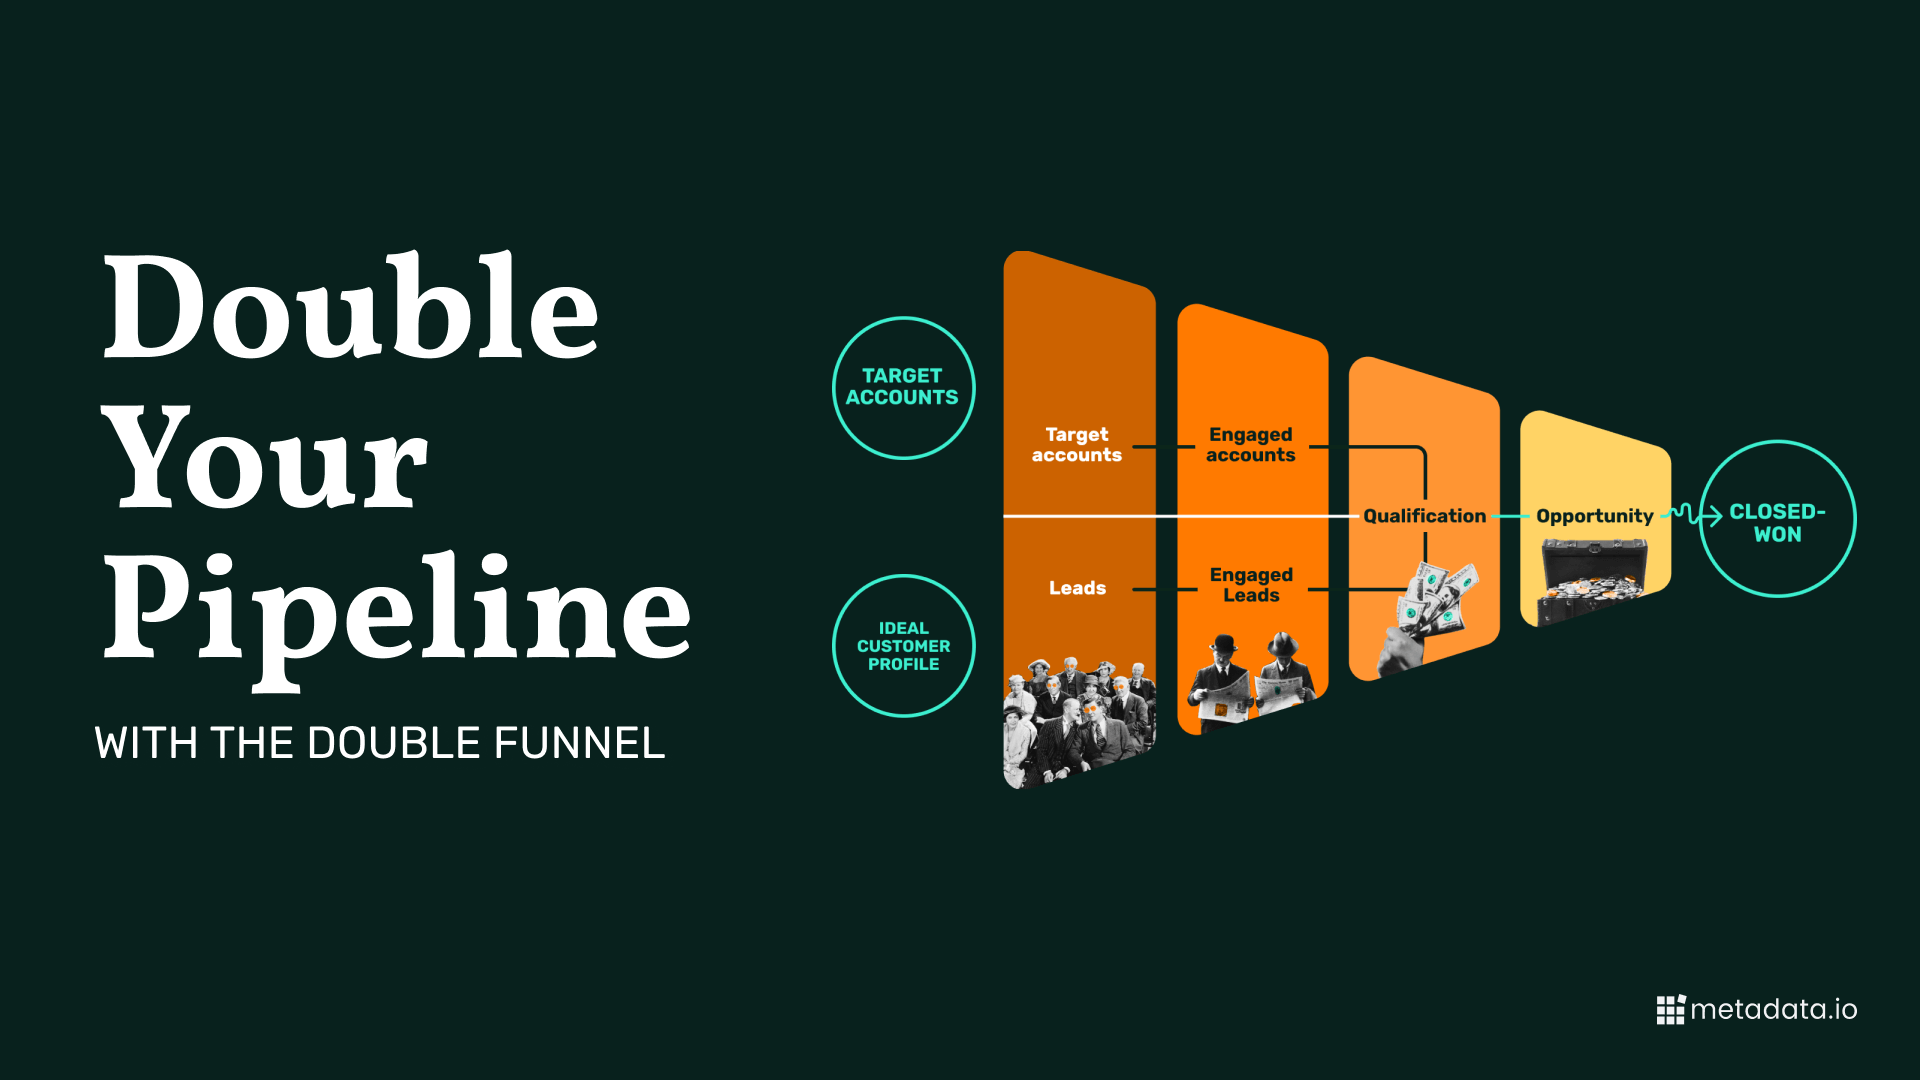 How to Double Your Pipeline With the Double Funnel